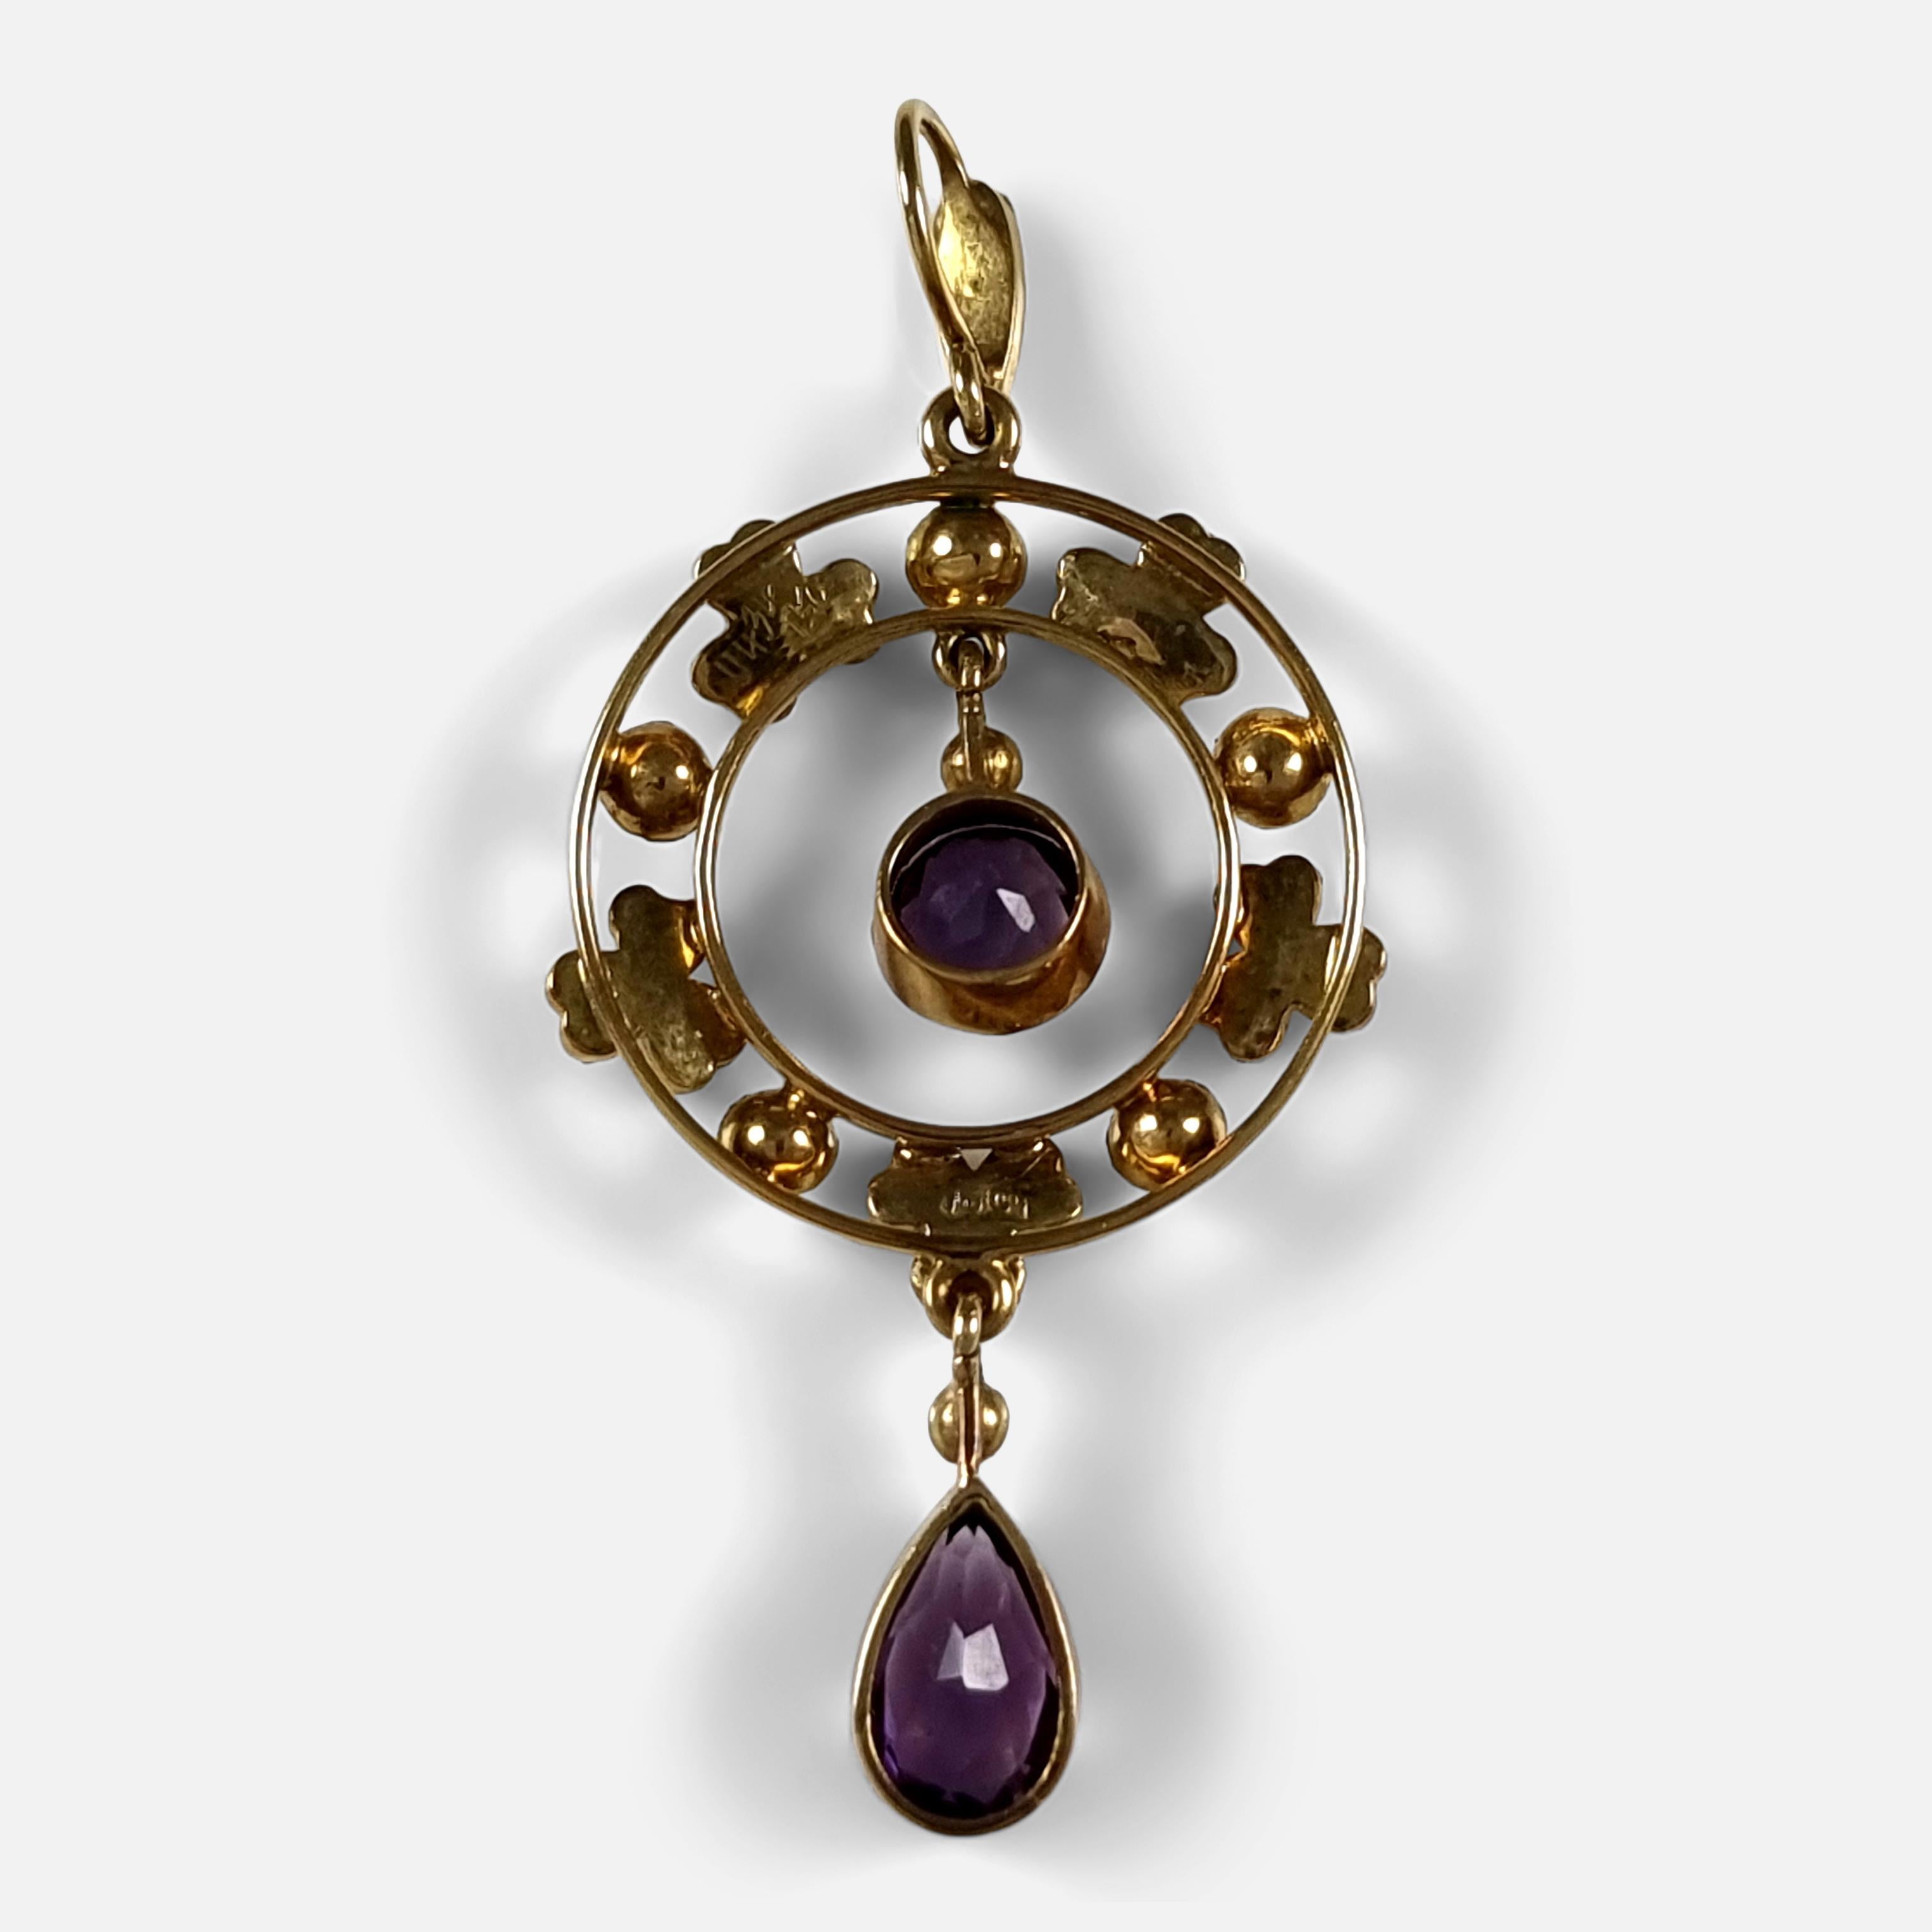 Edwardian 15ct Gold Amethyst and Seed Pearl Pendant For Sale 1